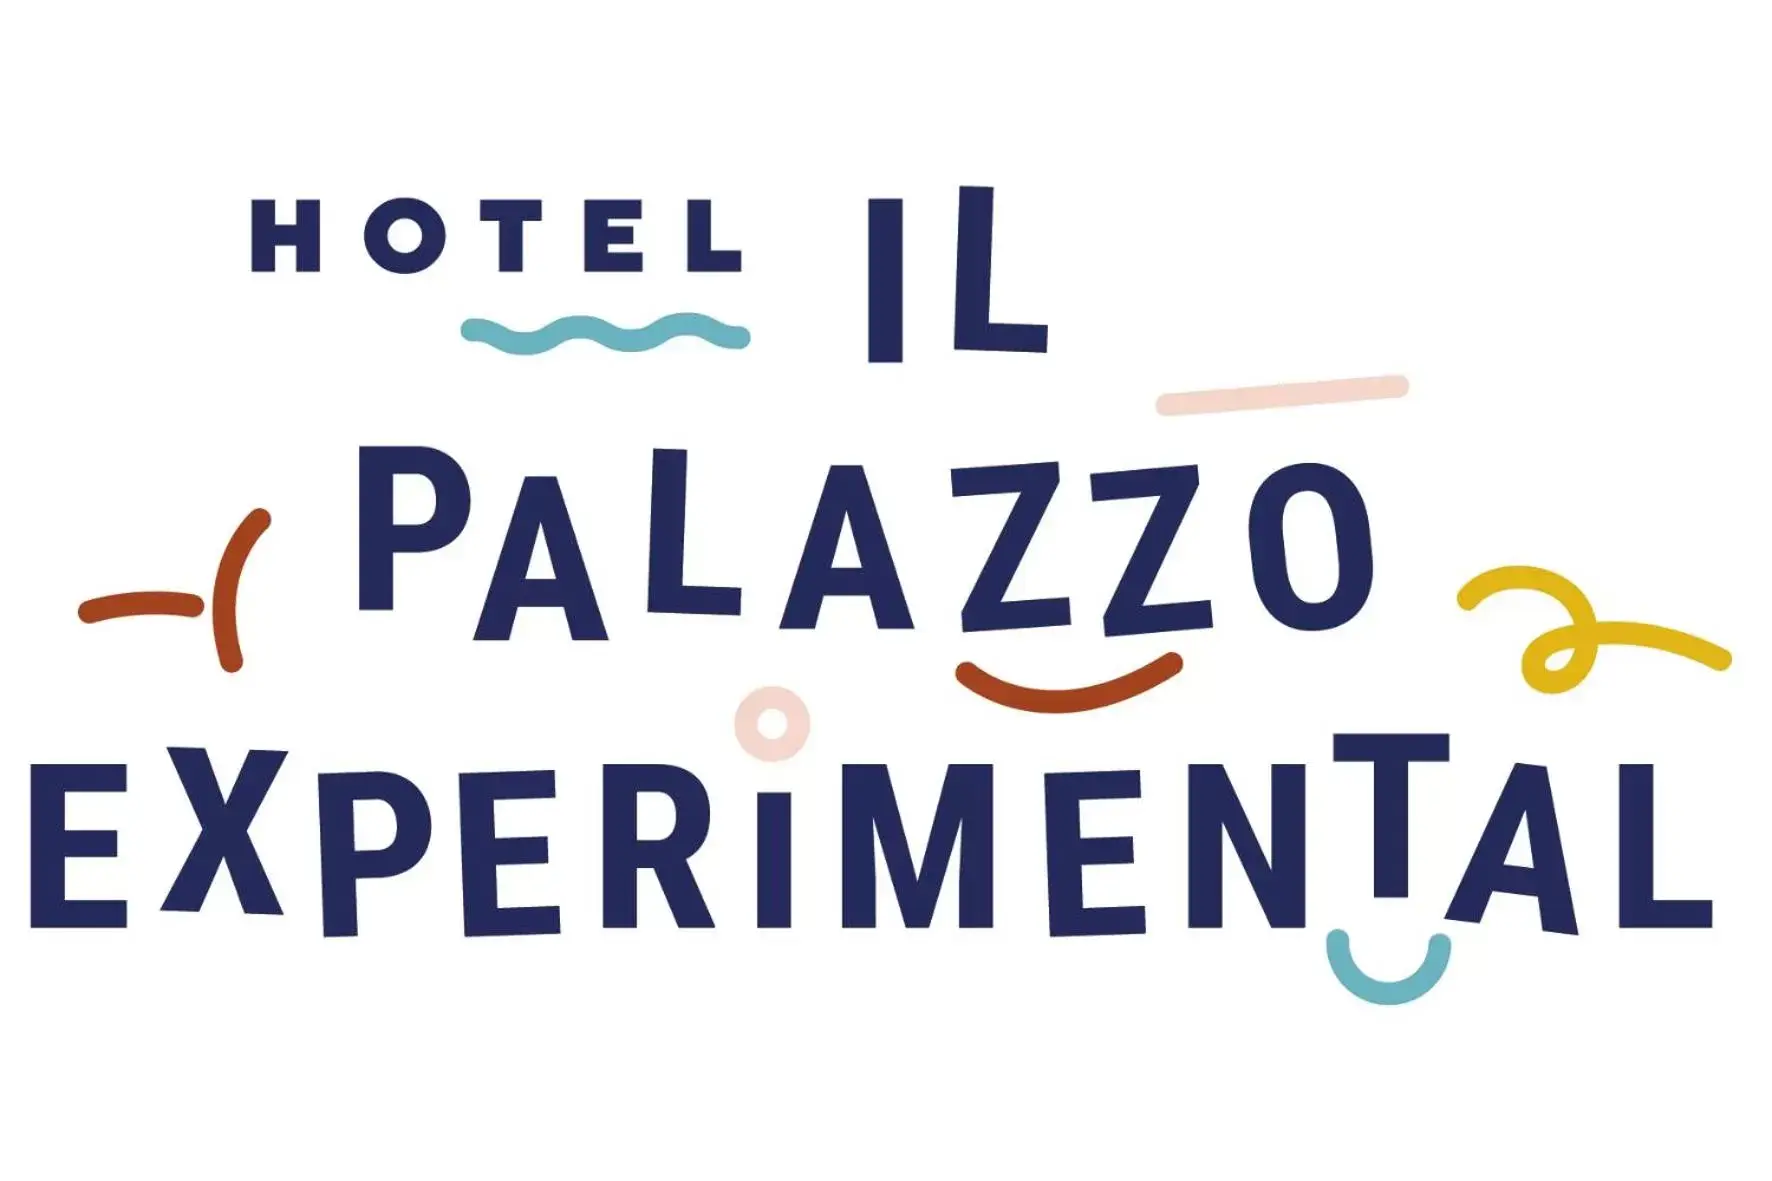 Property logo or sign in Il Palazzo Experimental